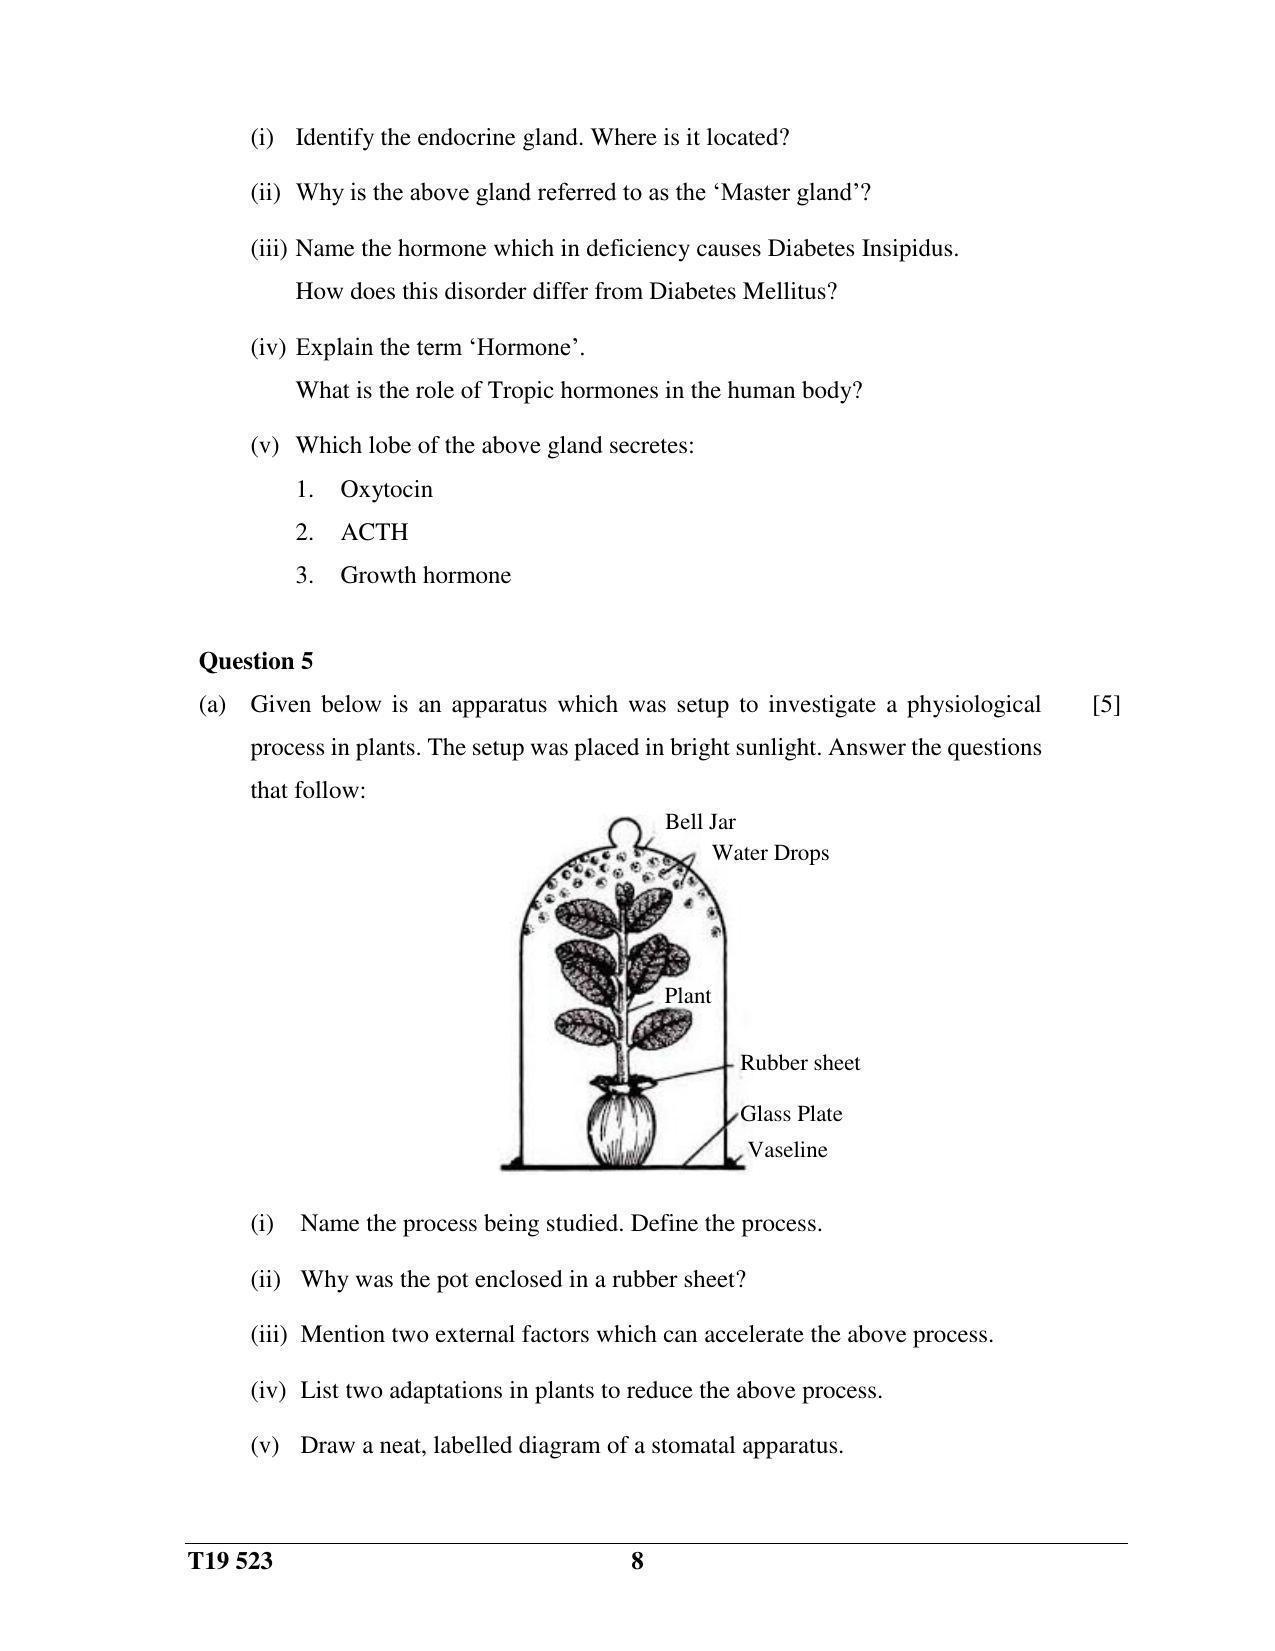 ICSE Class 10 Science Paper 3 (Biology) 2019 Question Paper - Page 8